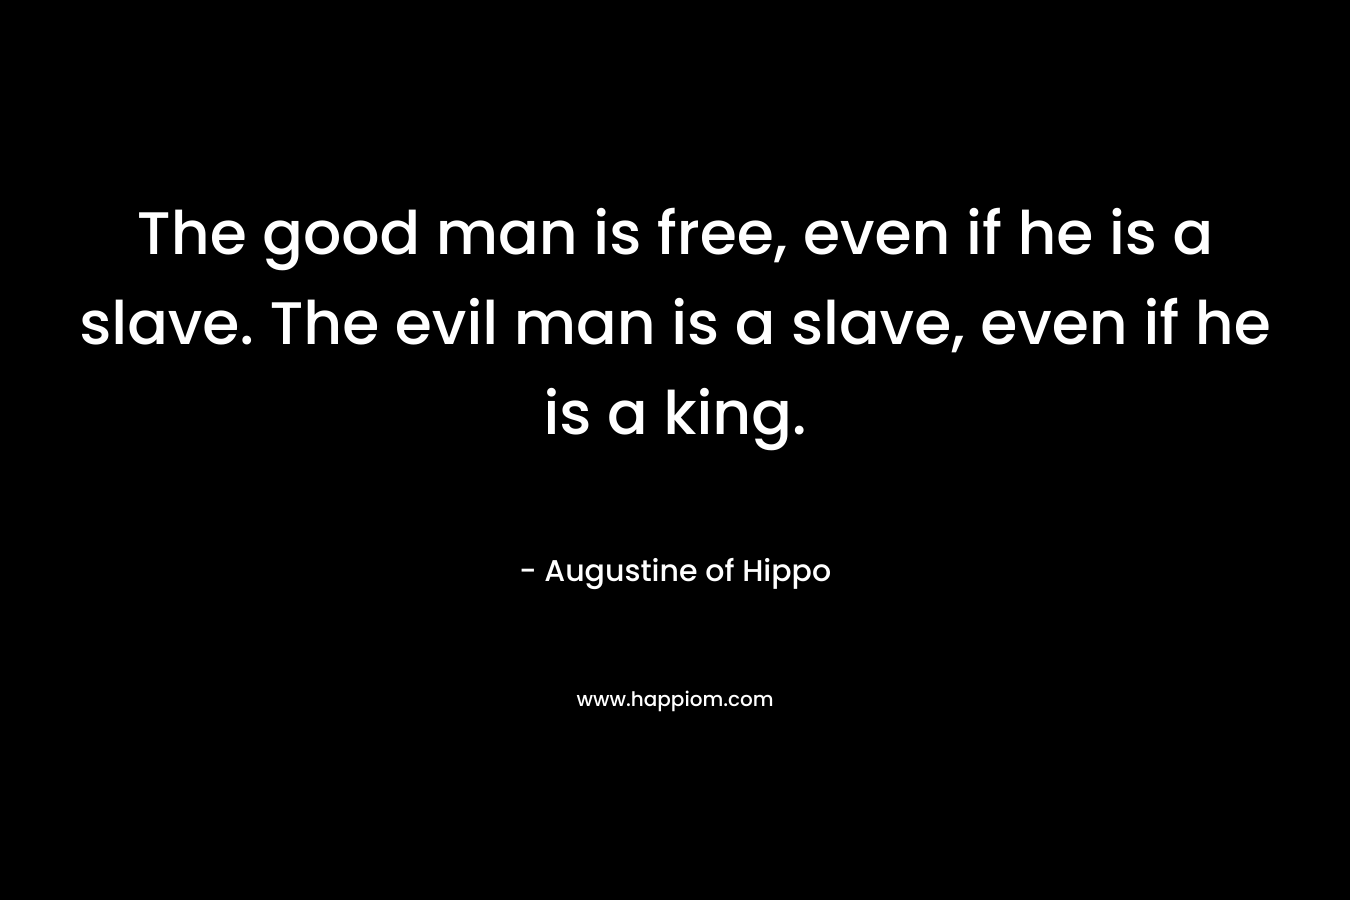 The good man is free, even if he is a slave. The evil man is a slave, even if he is a king.